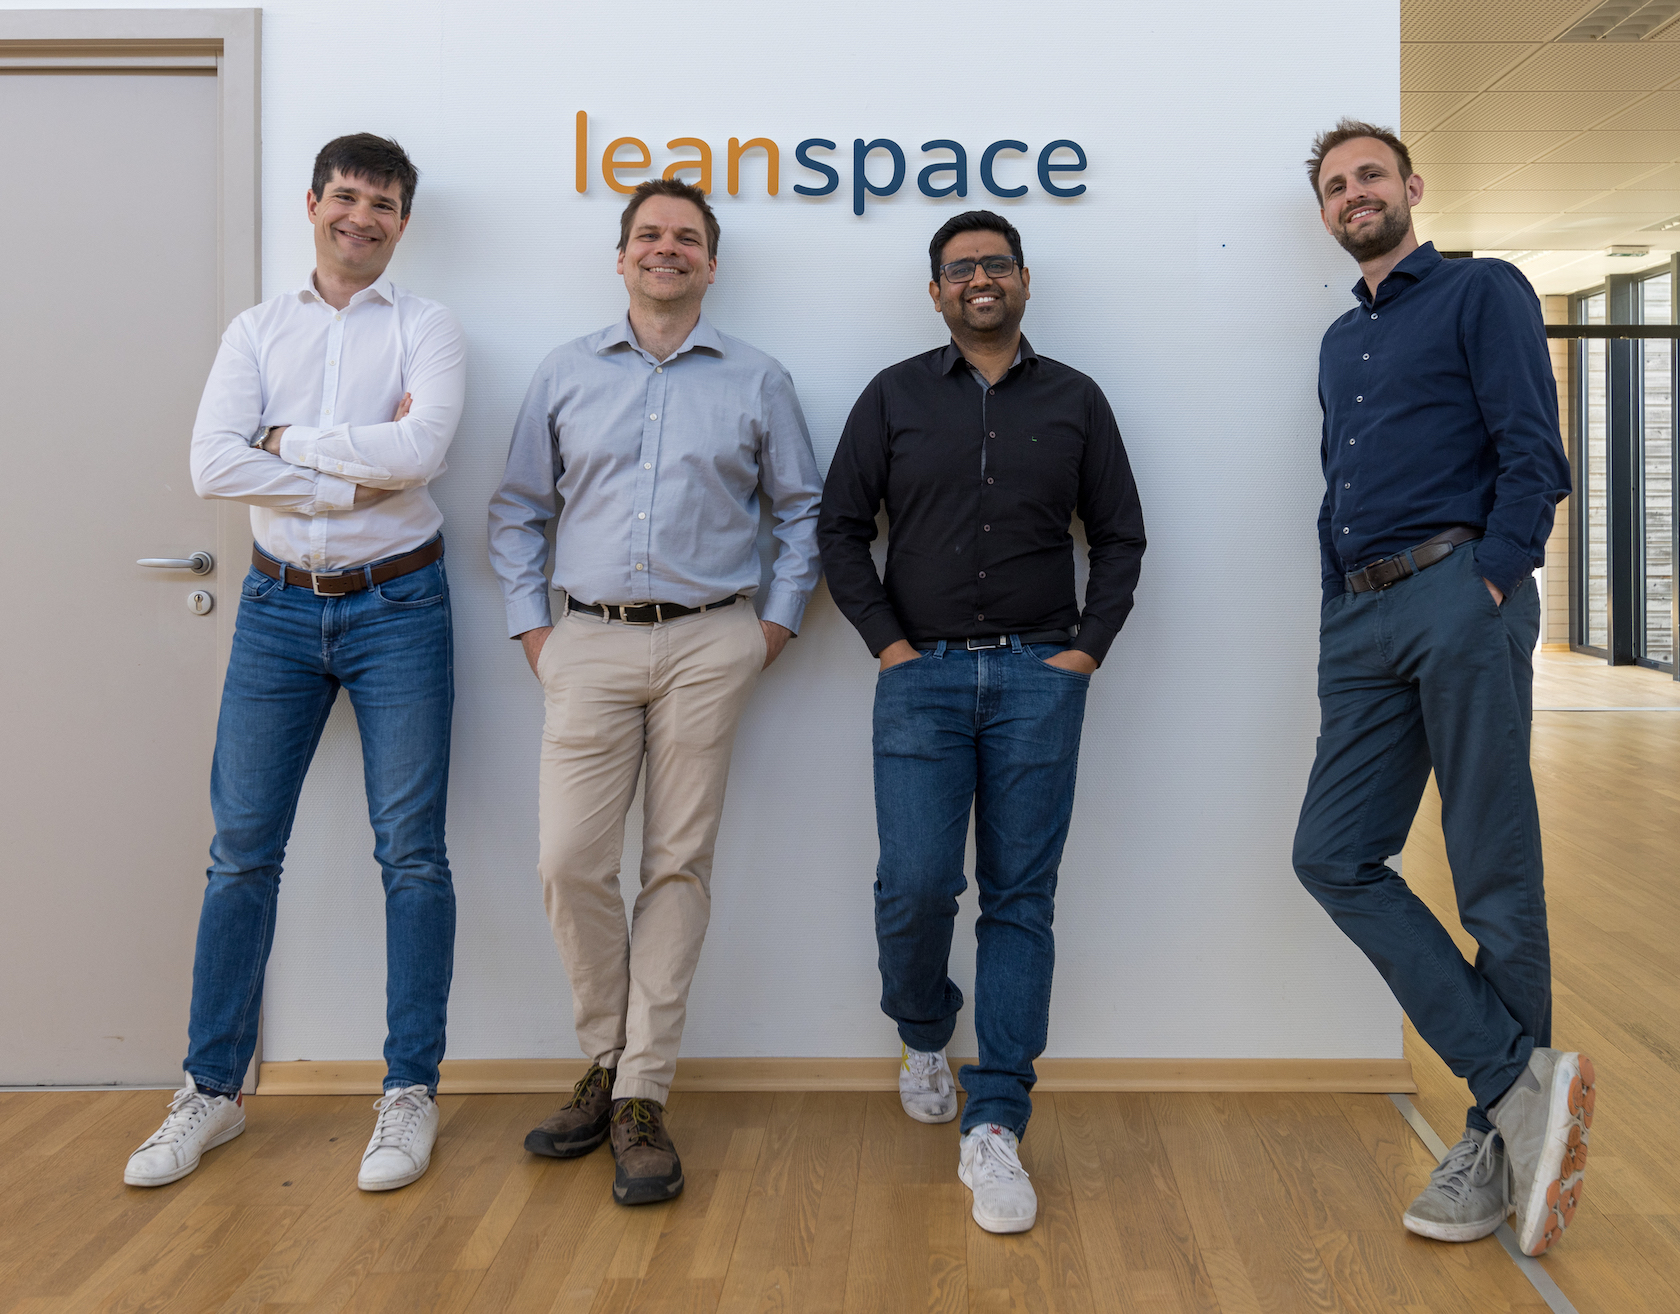 Learnspace raised 8.5 million euros for the development of space software